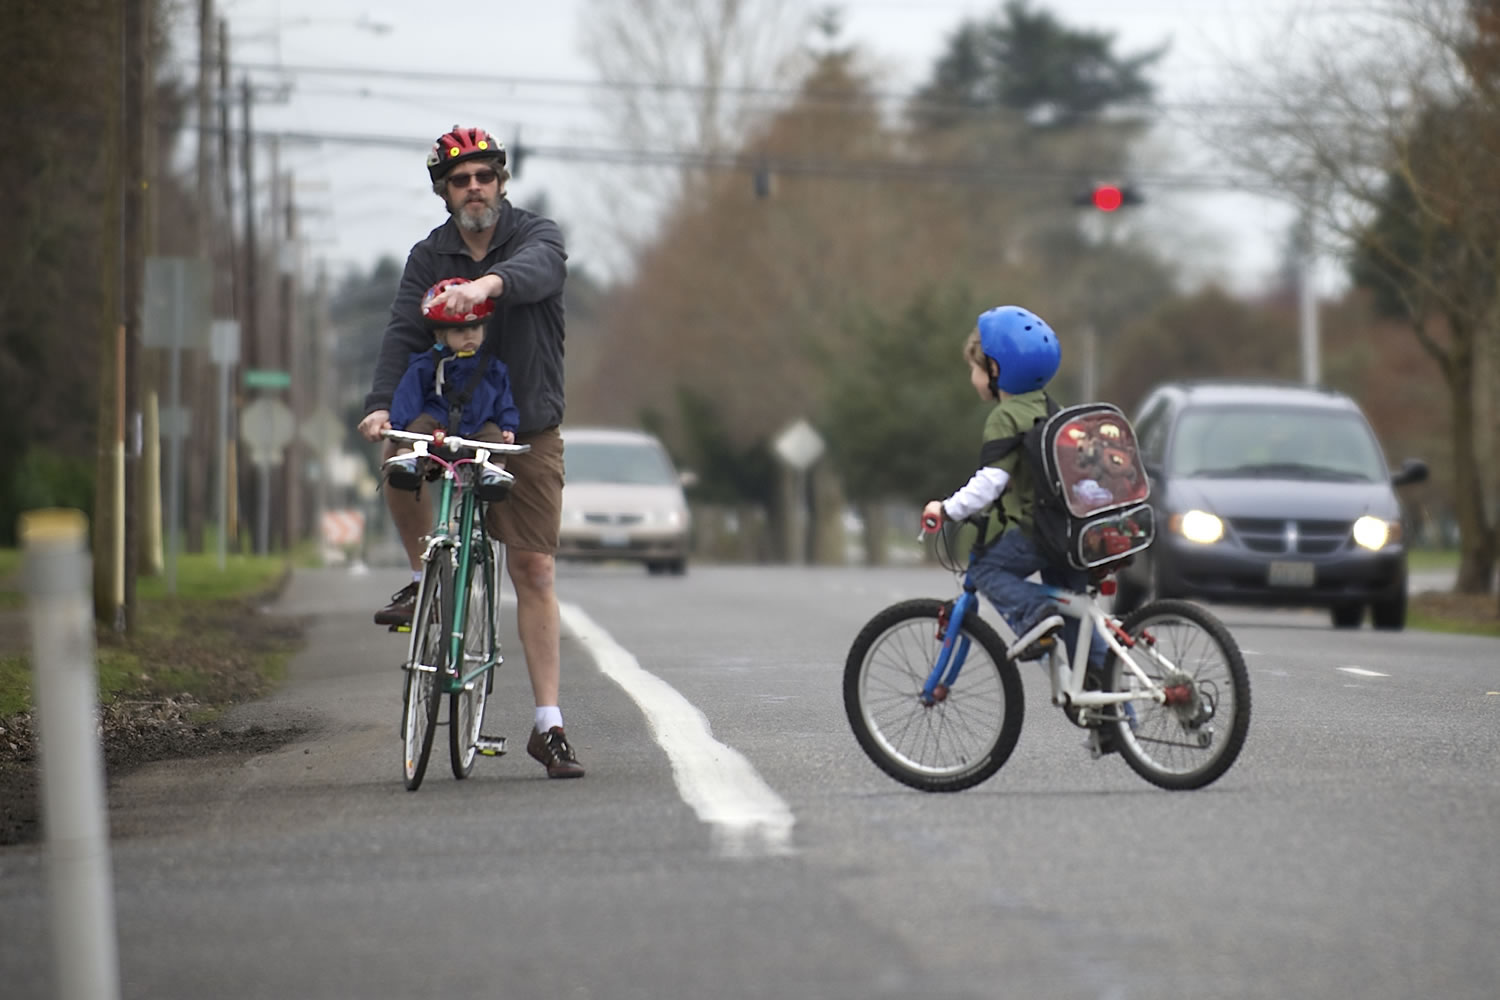 Paul Deming helps his son, Brian, 6, cross MacArthur Boulevard on March 13. Paul Deming and other cyclists have safety concerns along the corridor because of the large number of lanes and the speed of traffic.